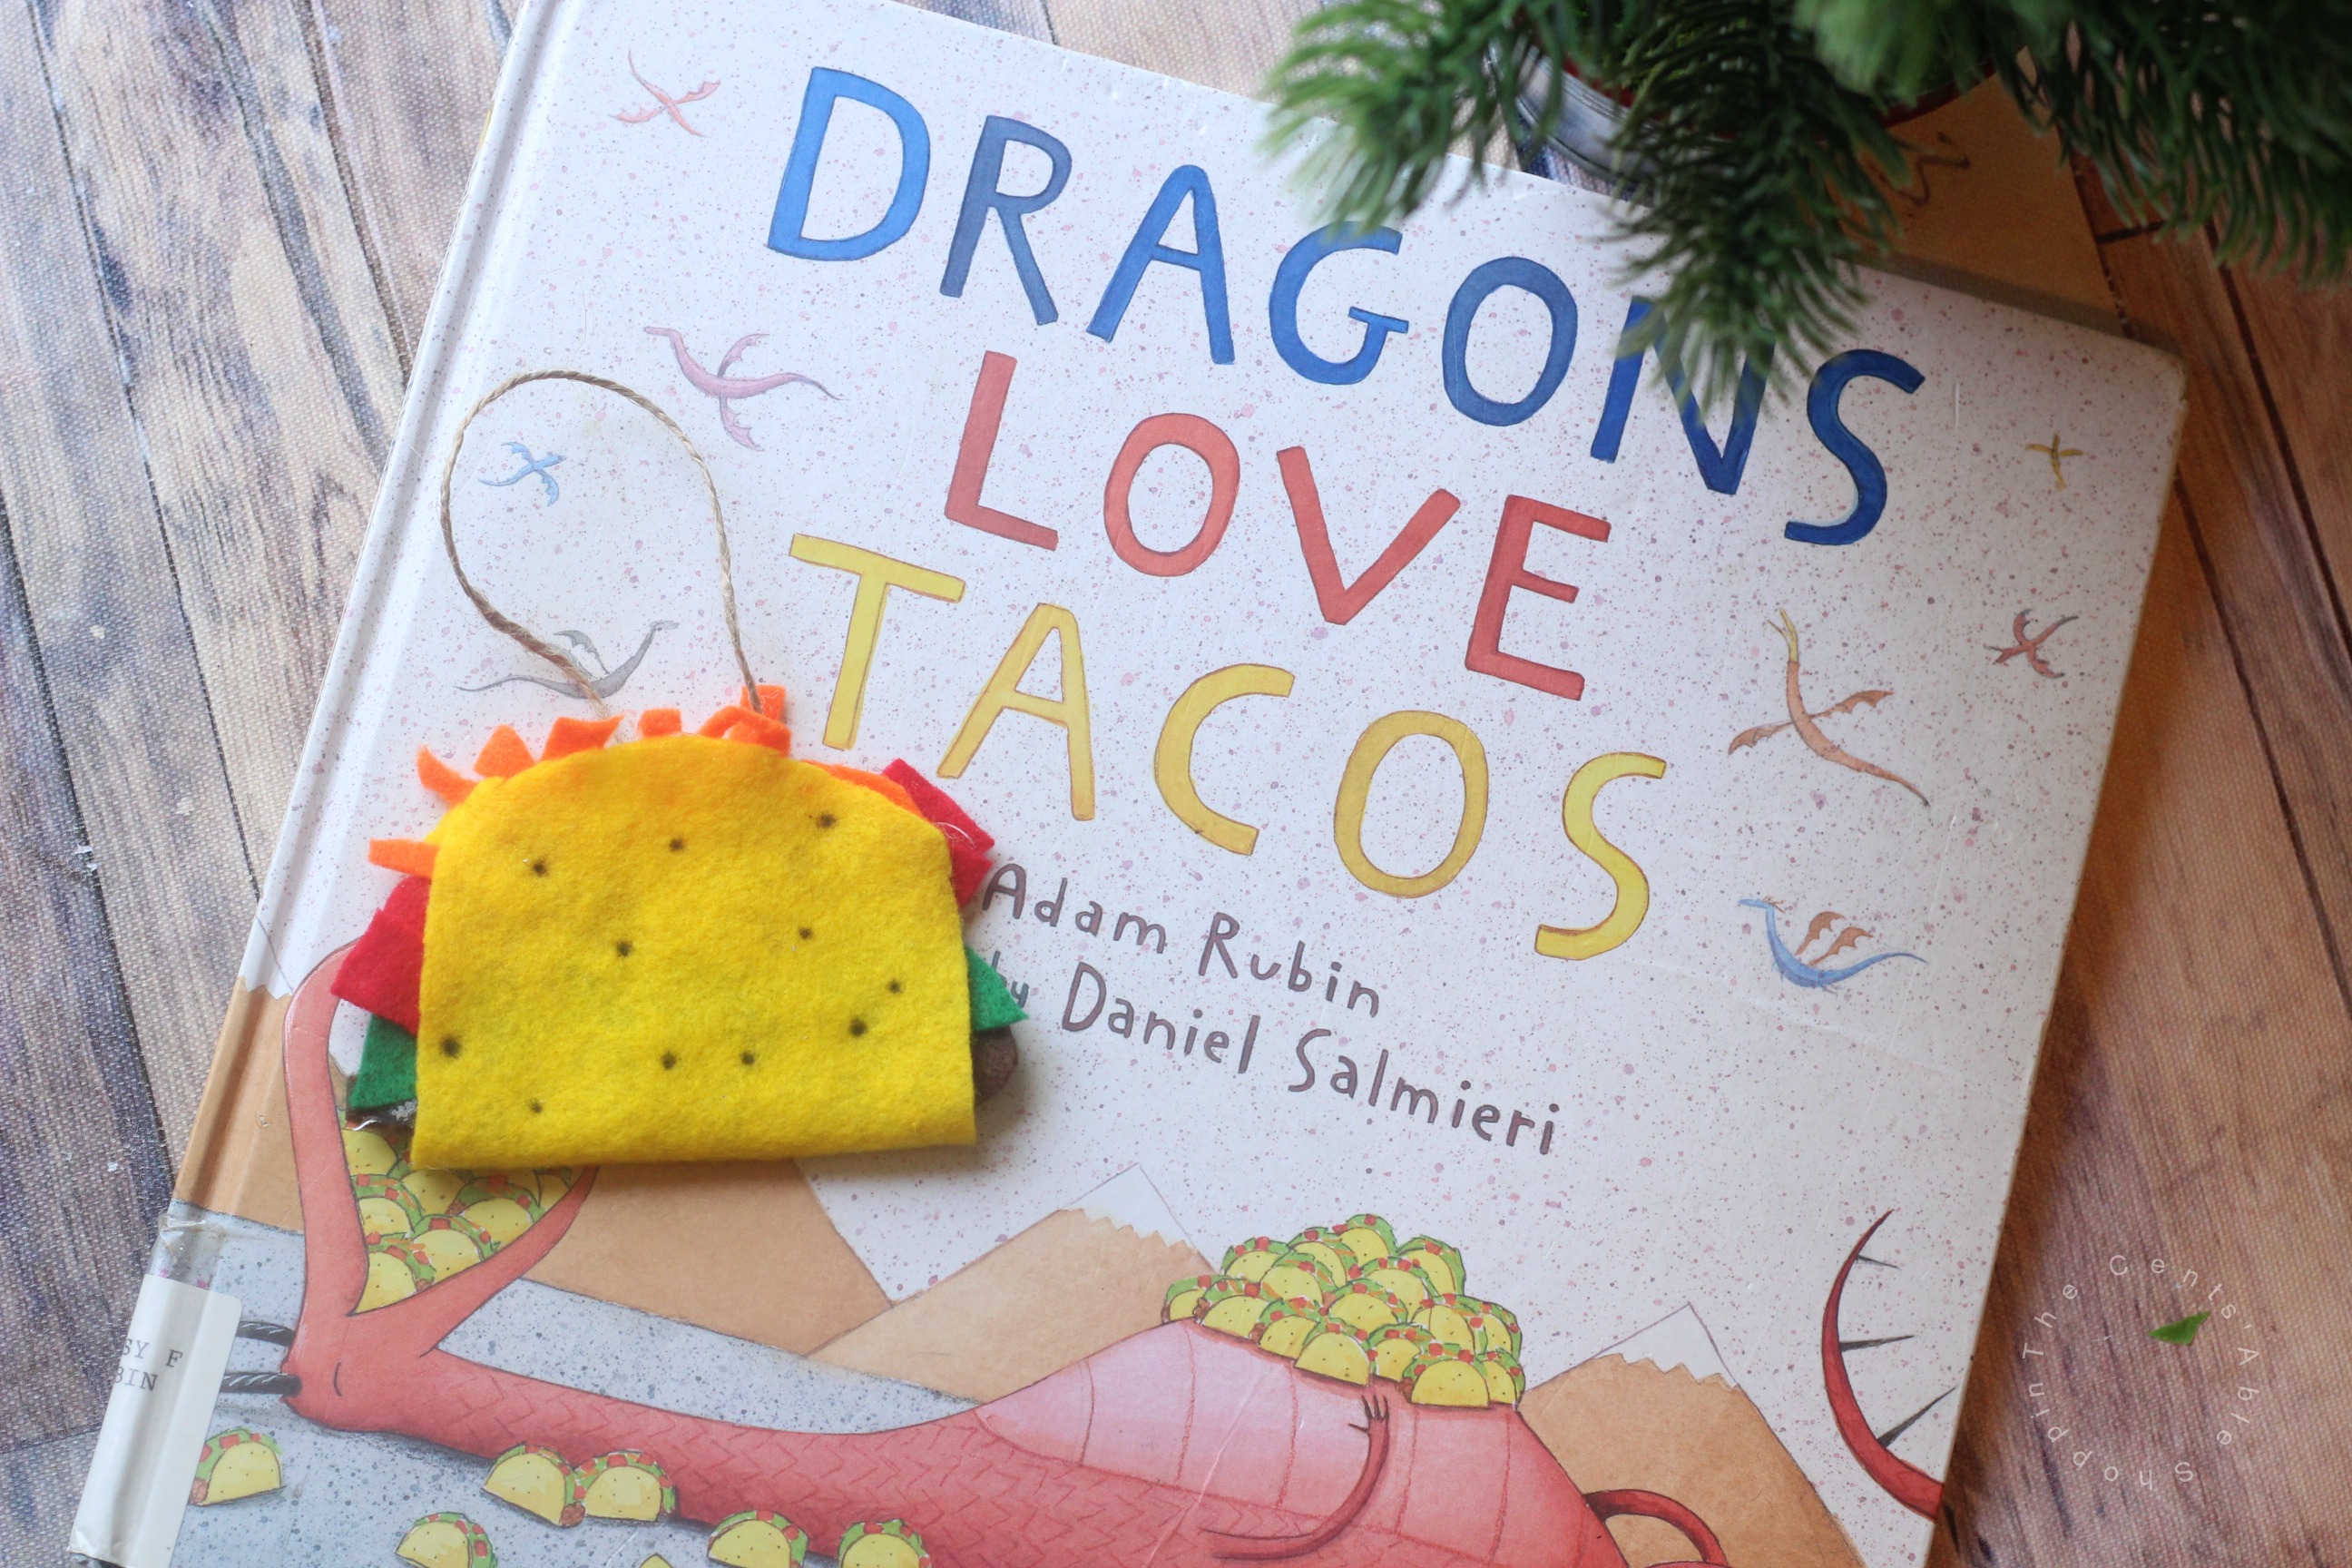 Dragons Love Tacos is a fun book about dragons who love to eat tacos. This Dragons Love Tacos Christmas Ornament is a fun complement to a wonderful story!